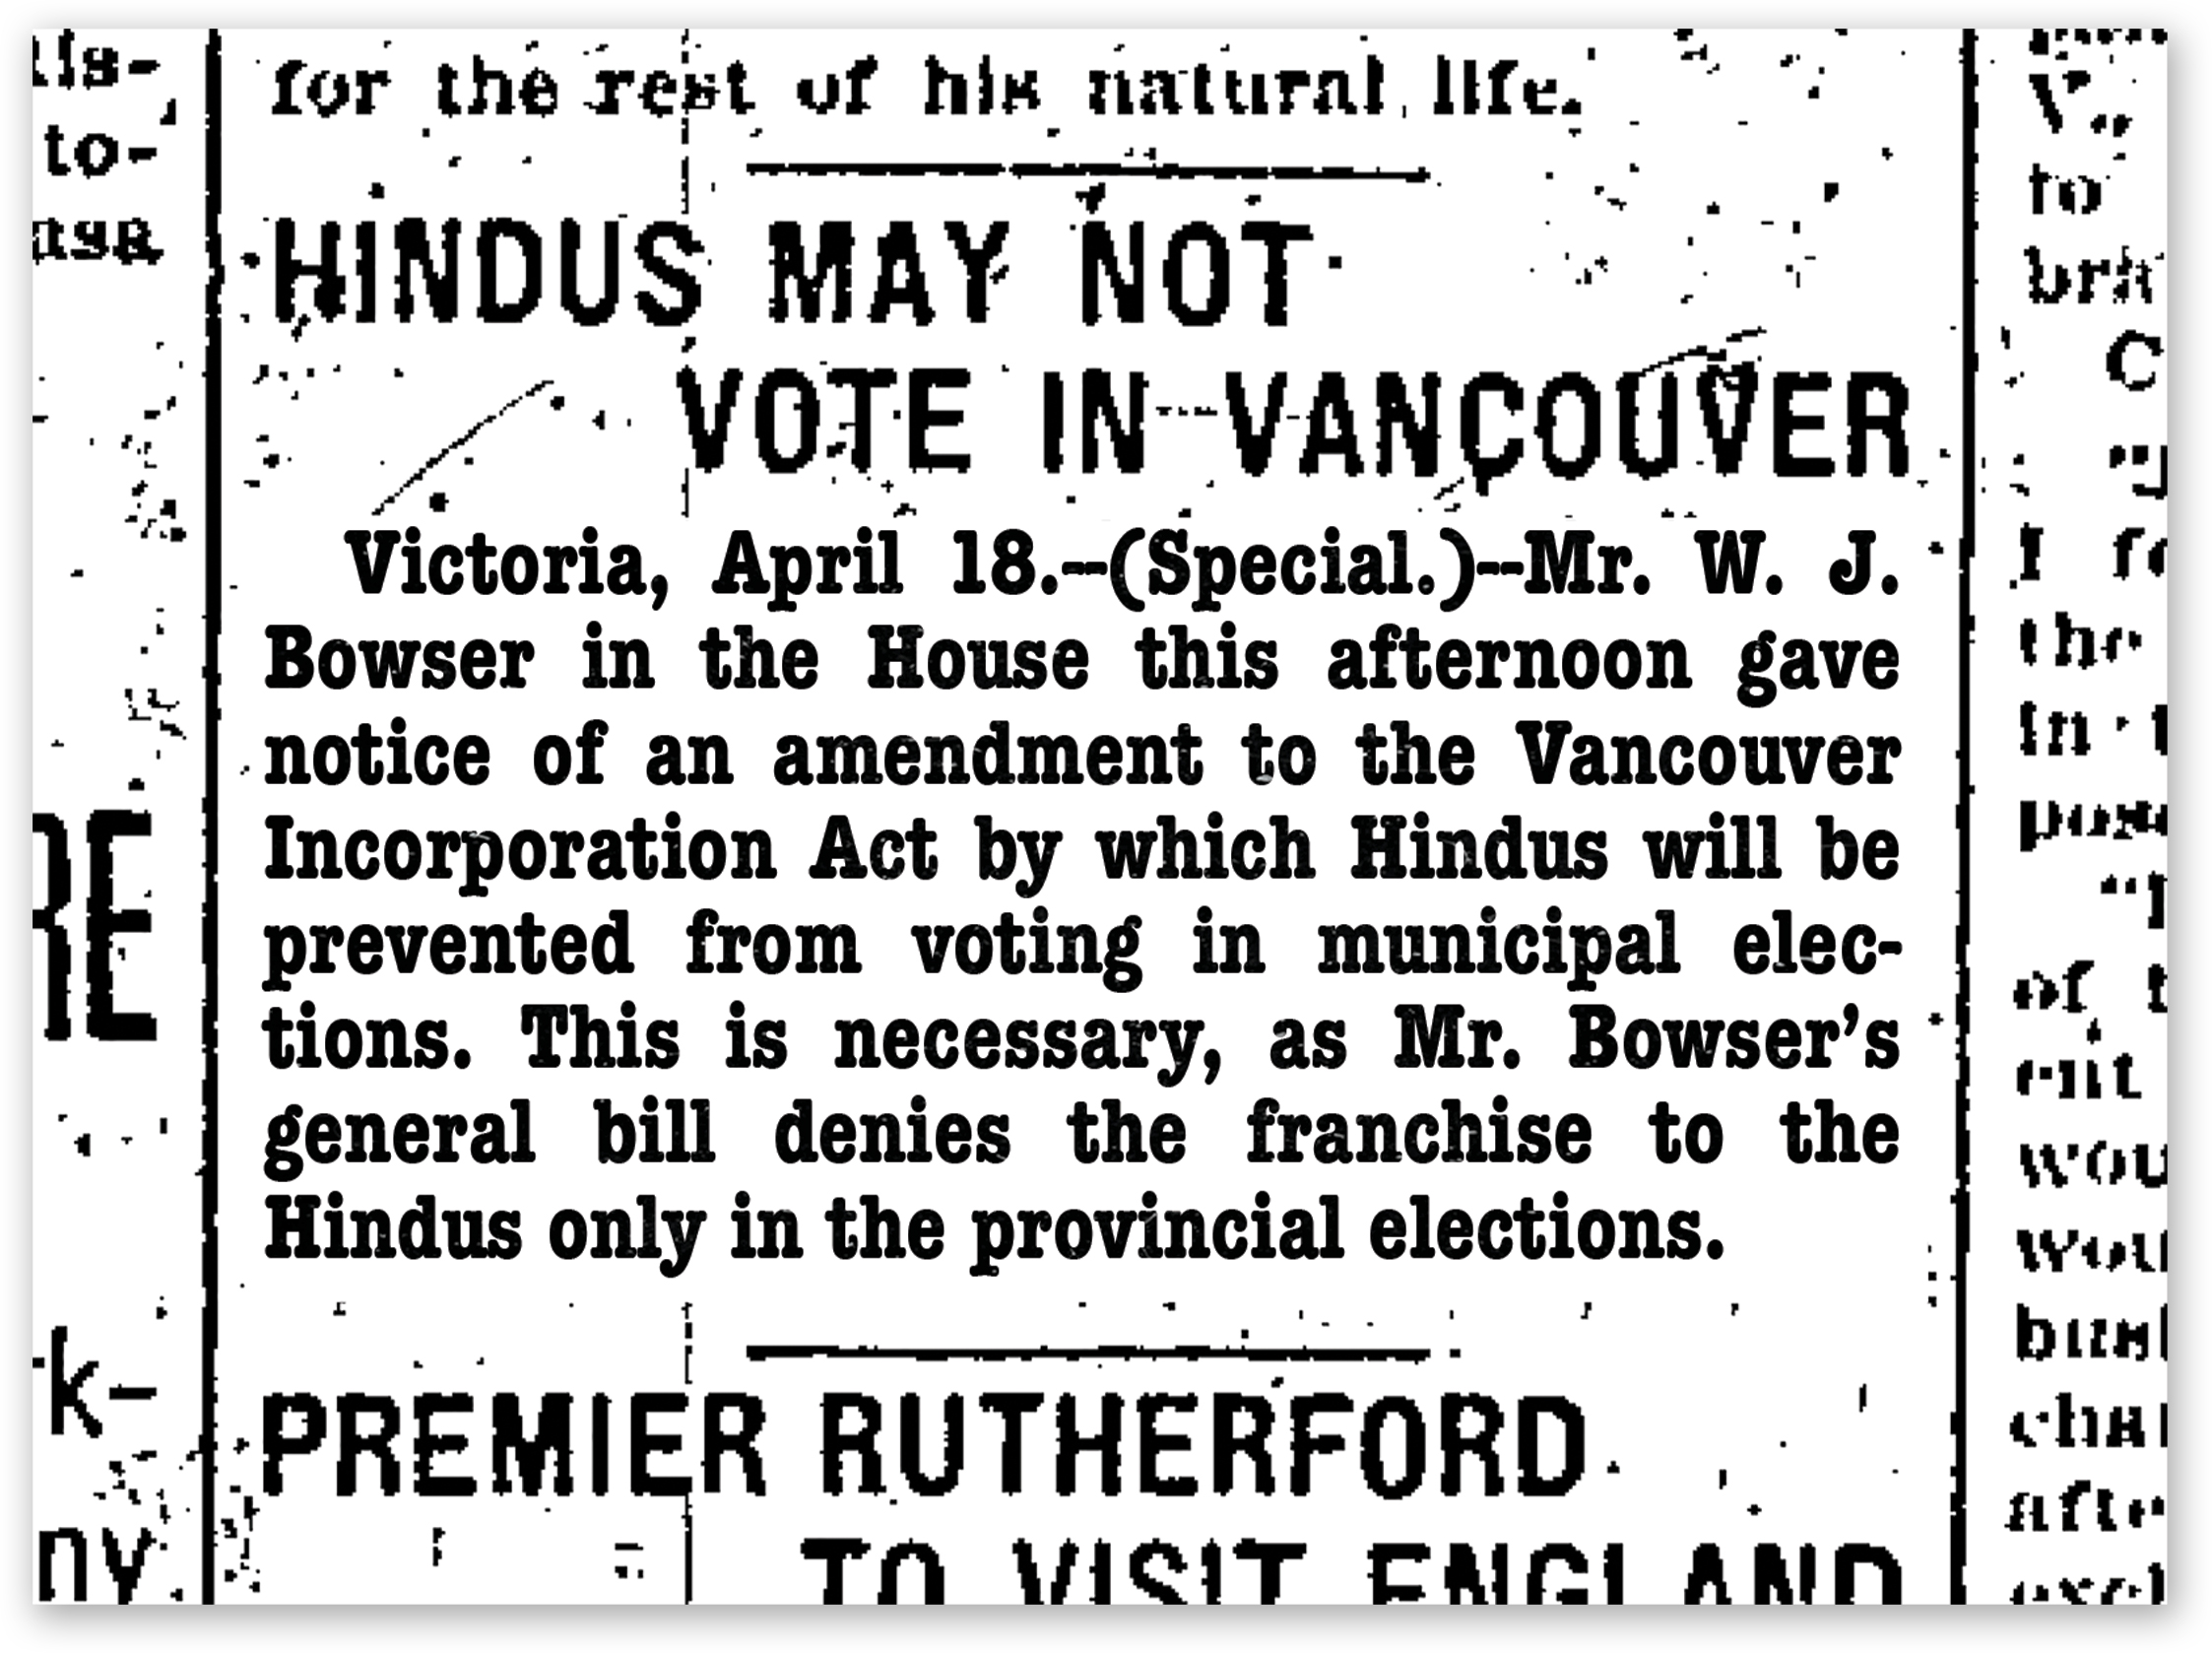 Article from The Vancouver Daily Province, April 18, 1907